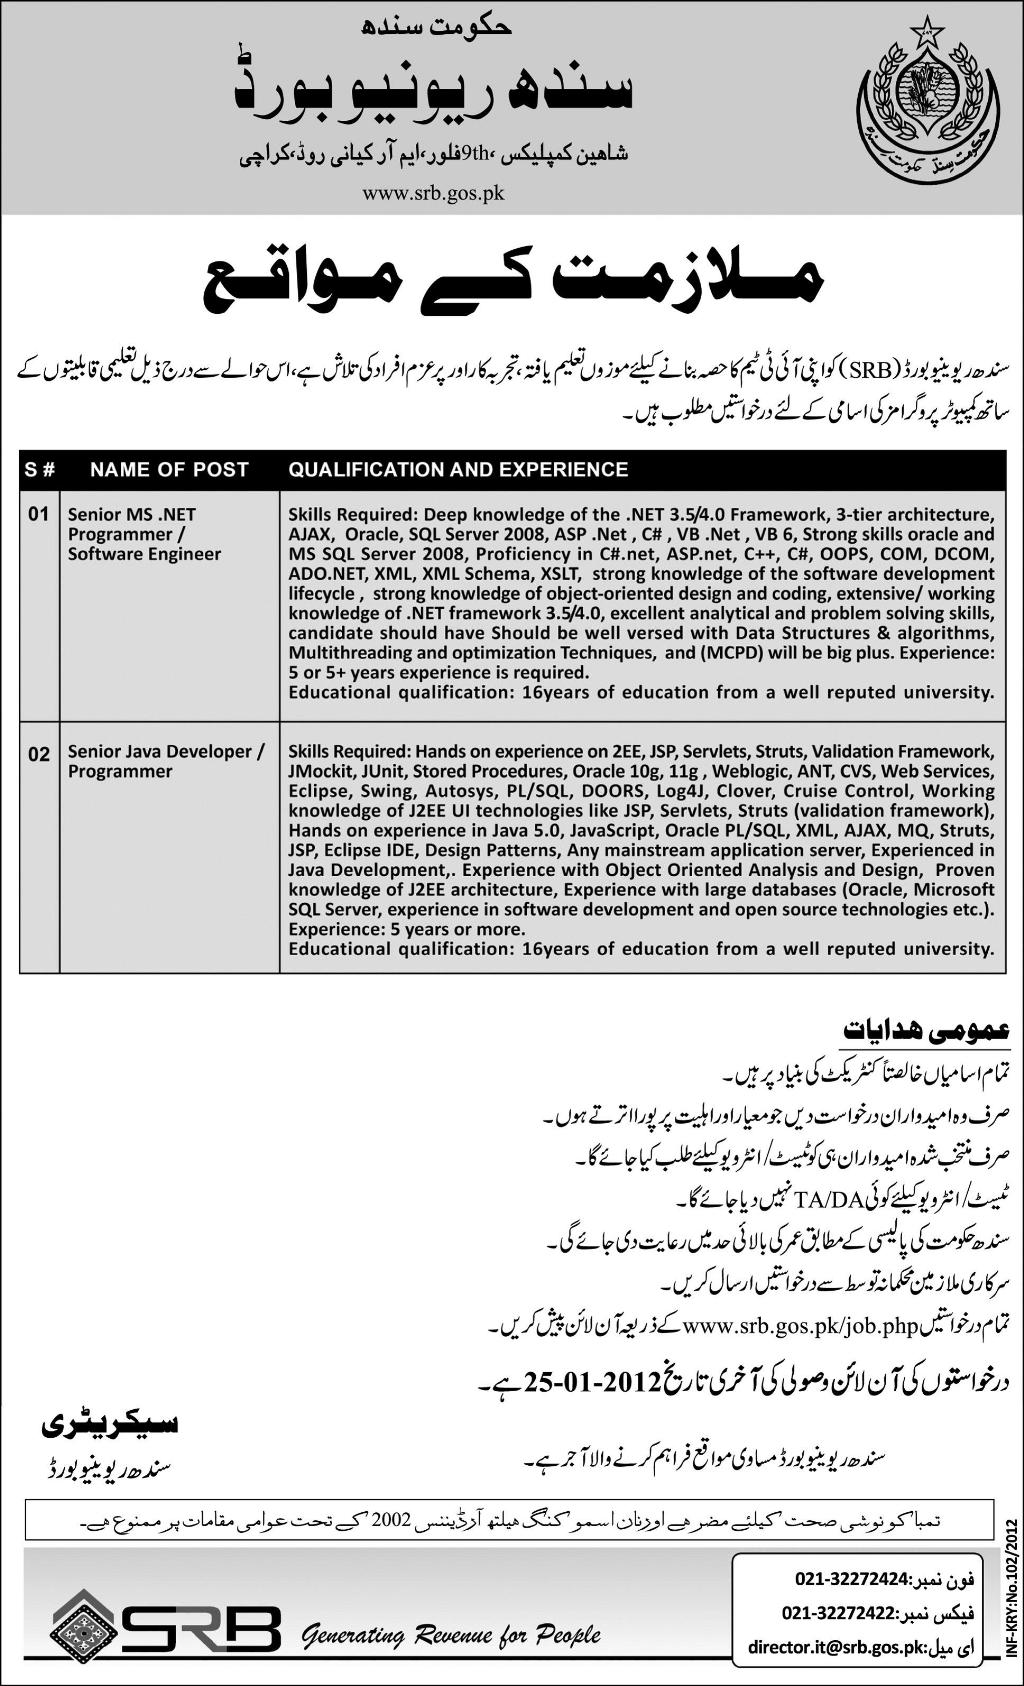 Sindh Revenue Board, Government of Sindh Jobs Opportunity